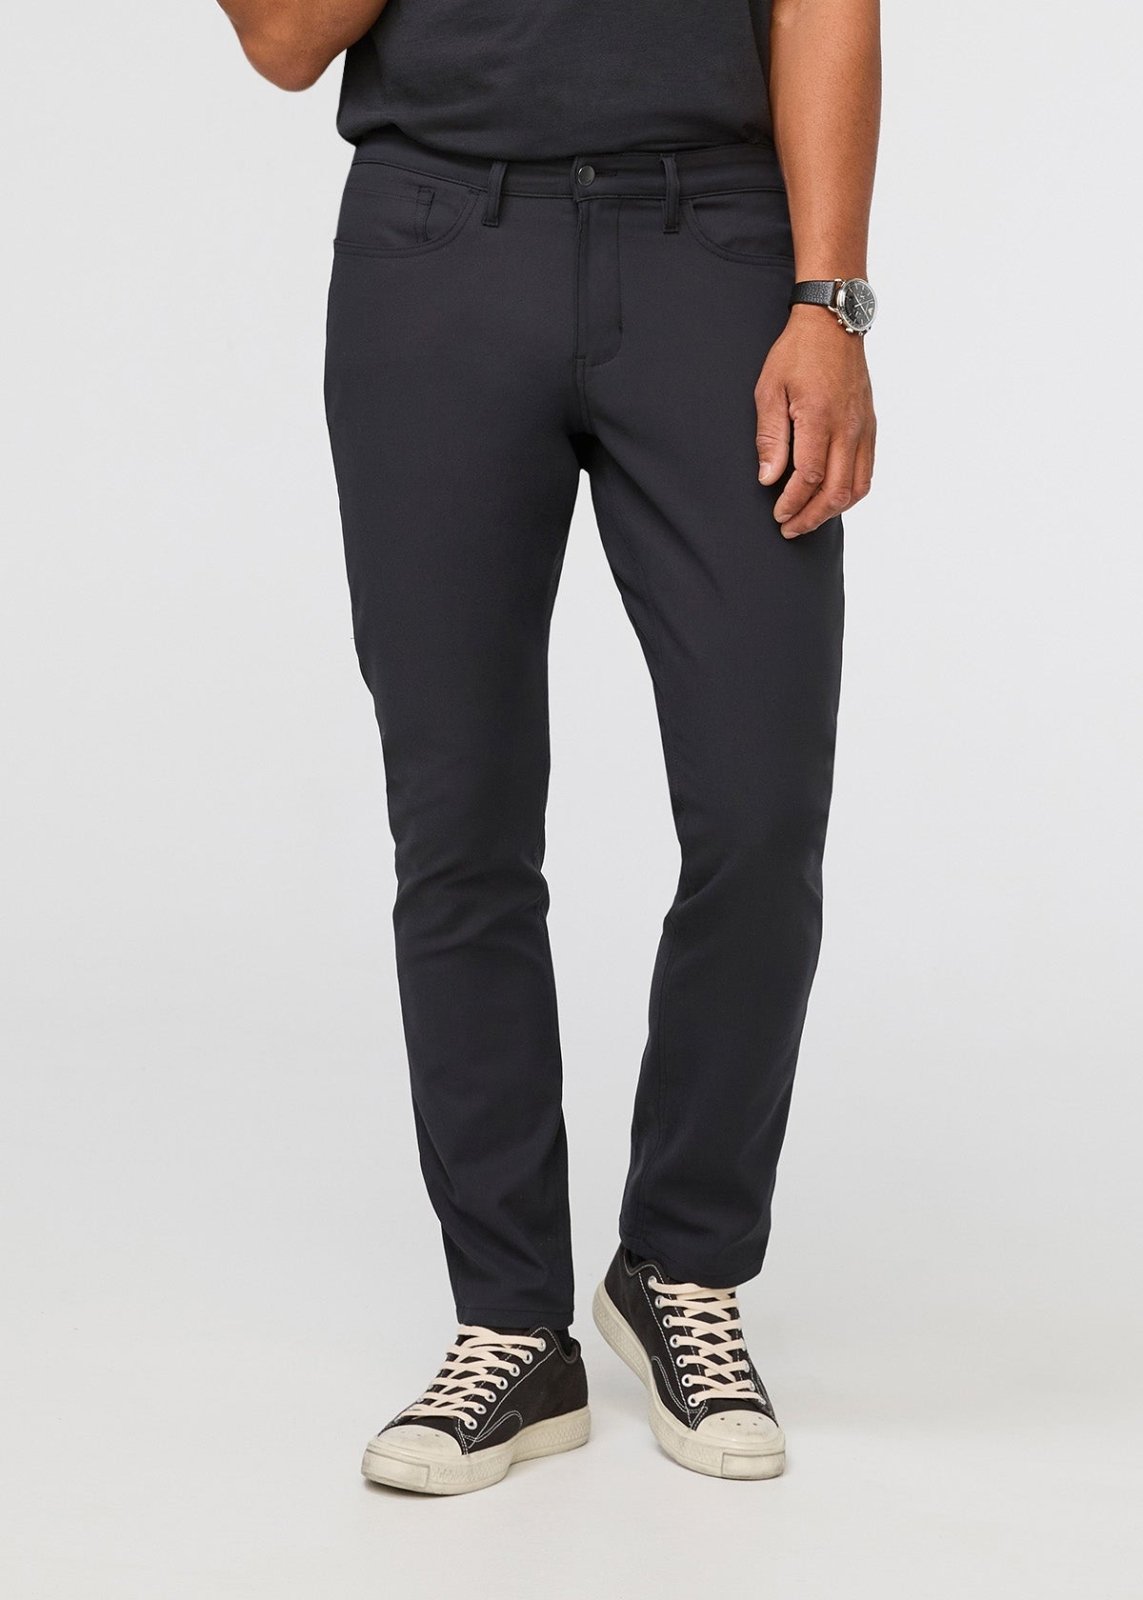 Men's Travel Pants - All in Motion Zippered pockets Stretch Button